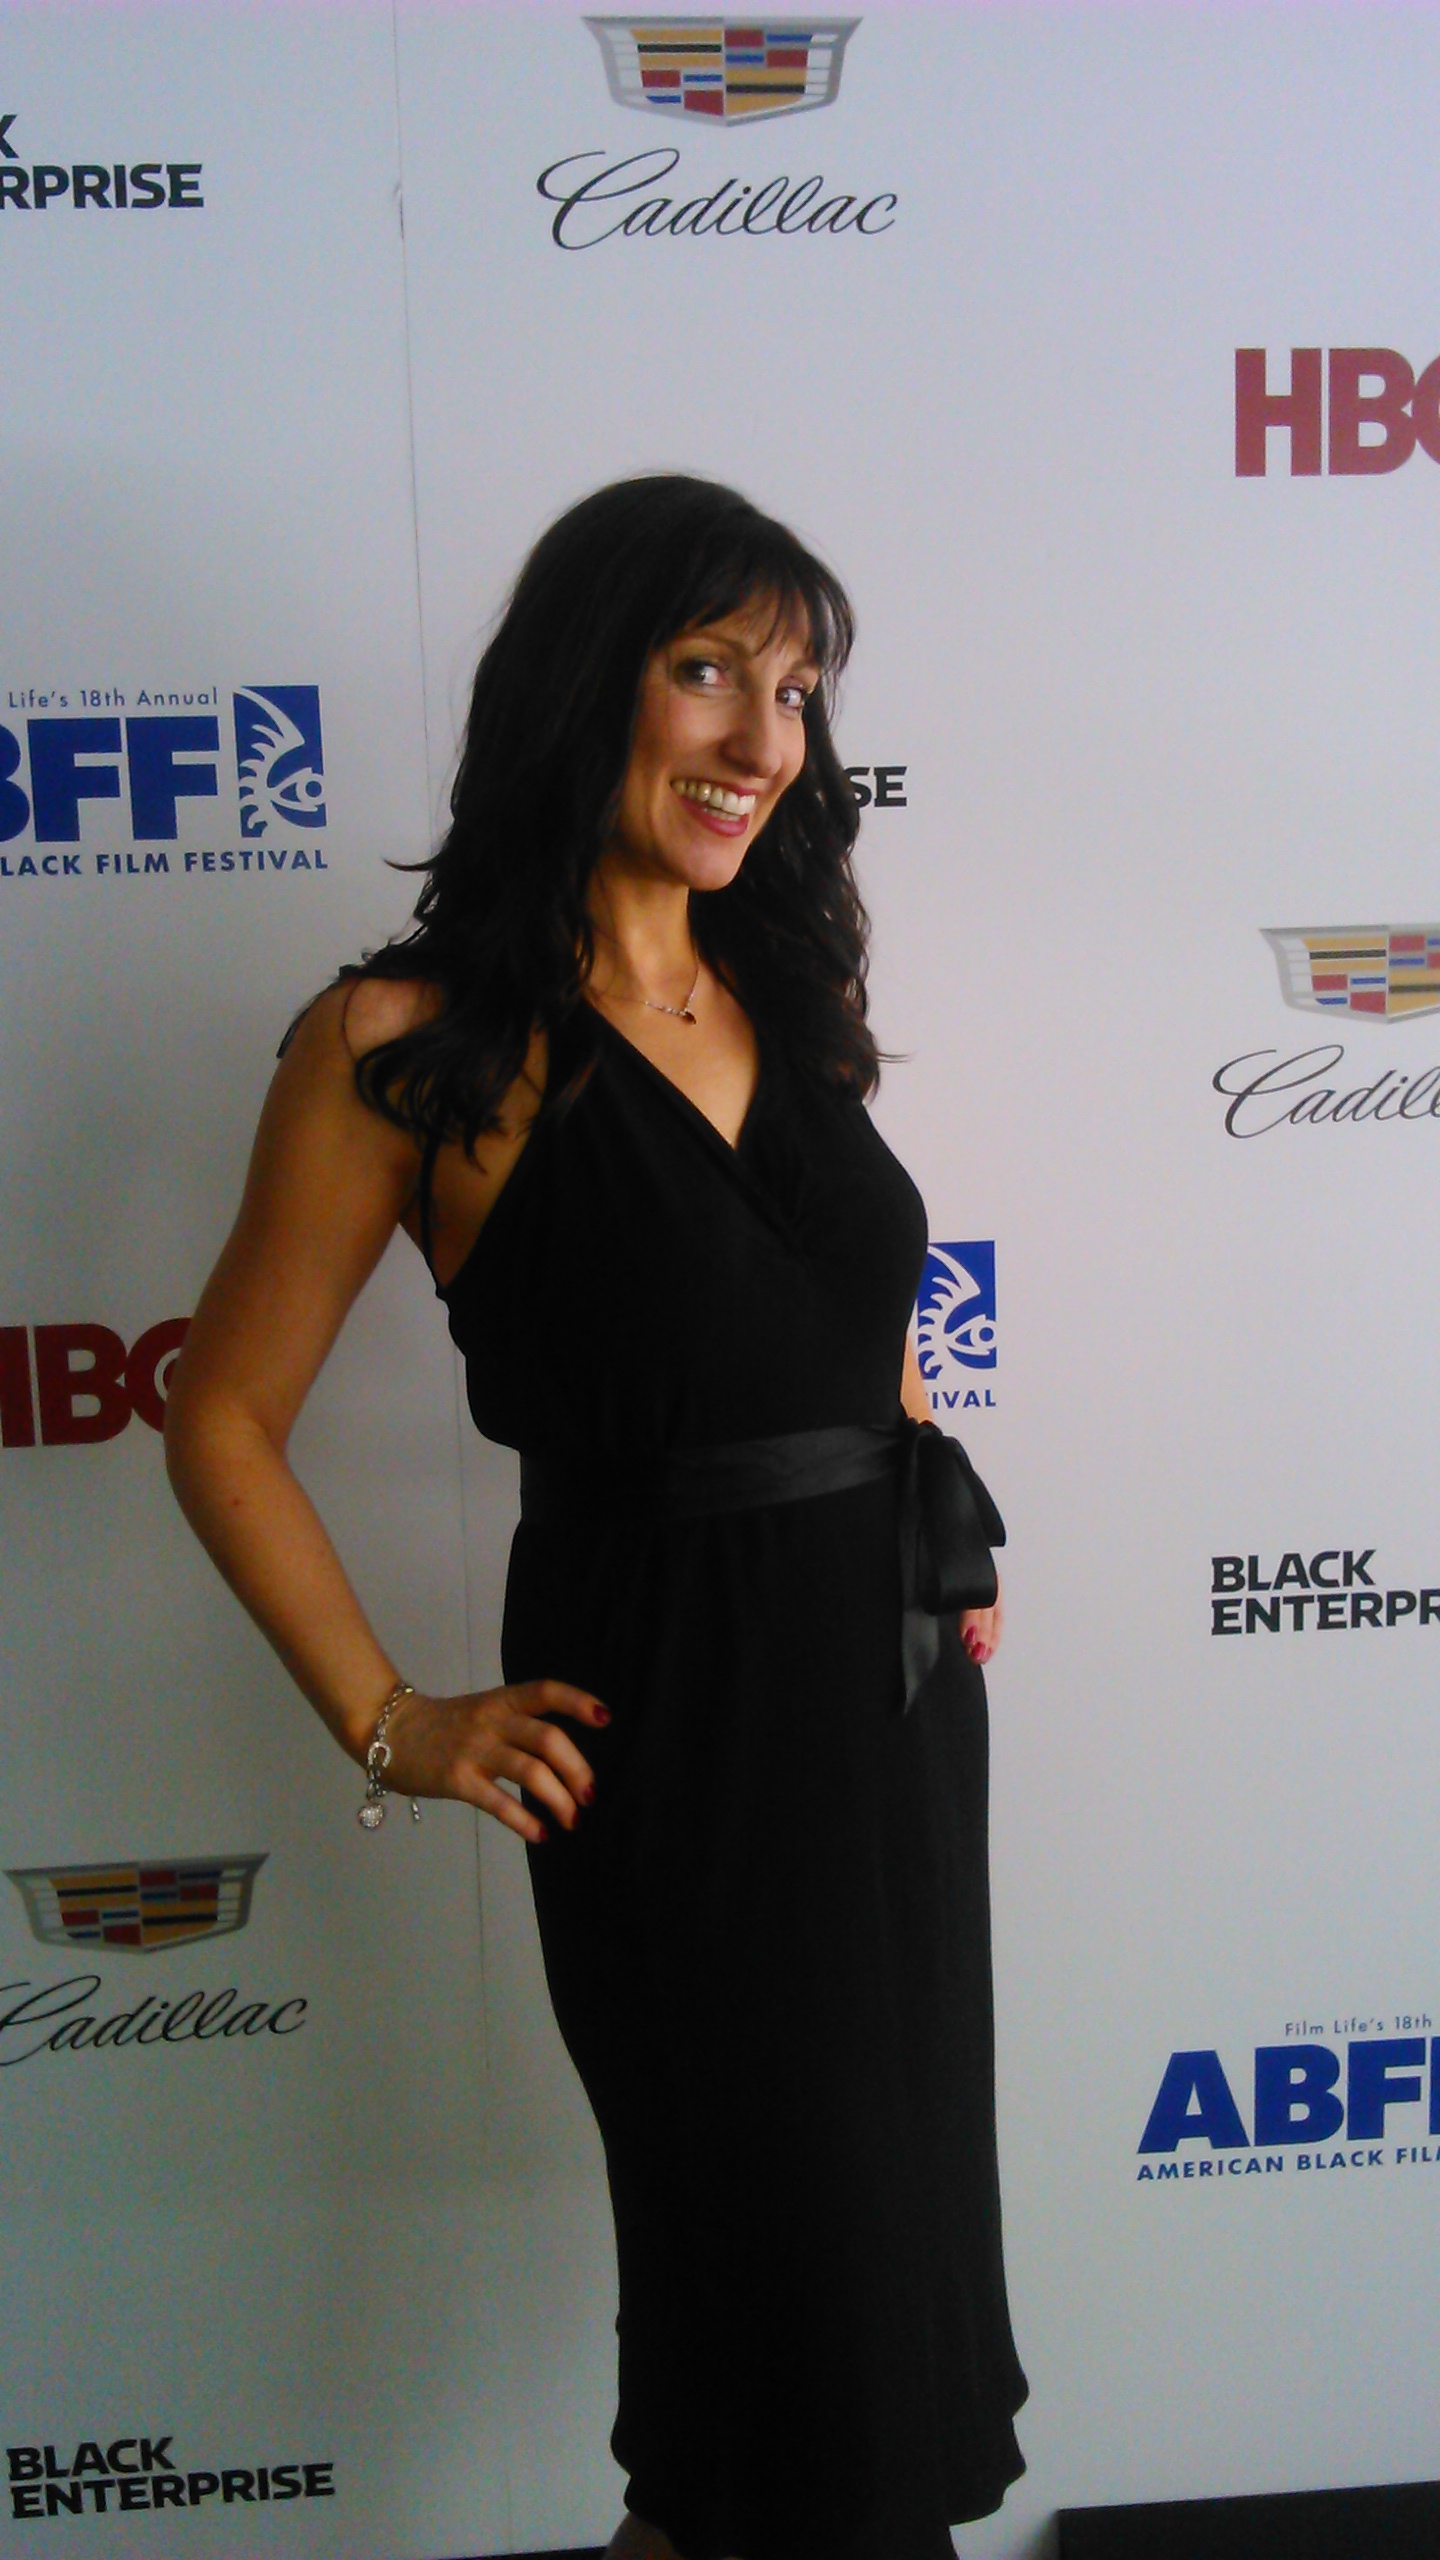 Sweetboy Premiere in New York - The American Black Film Festival